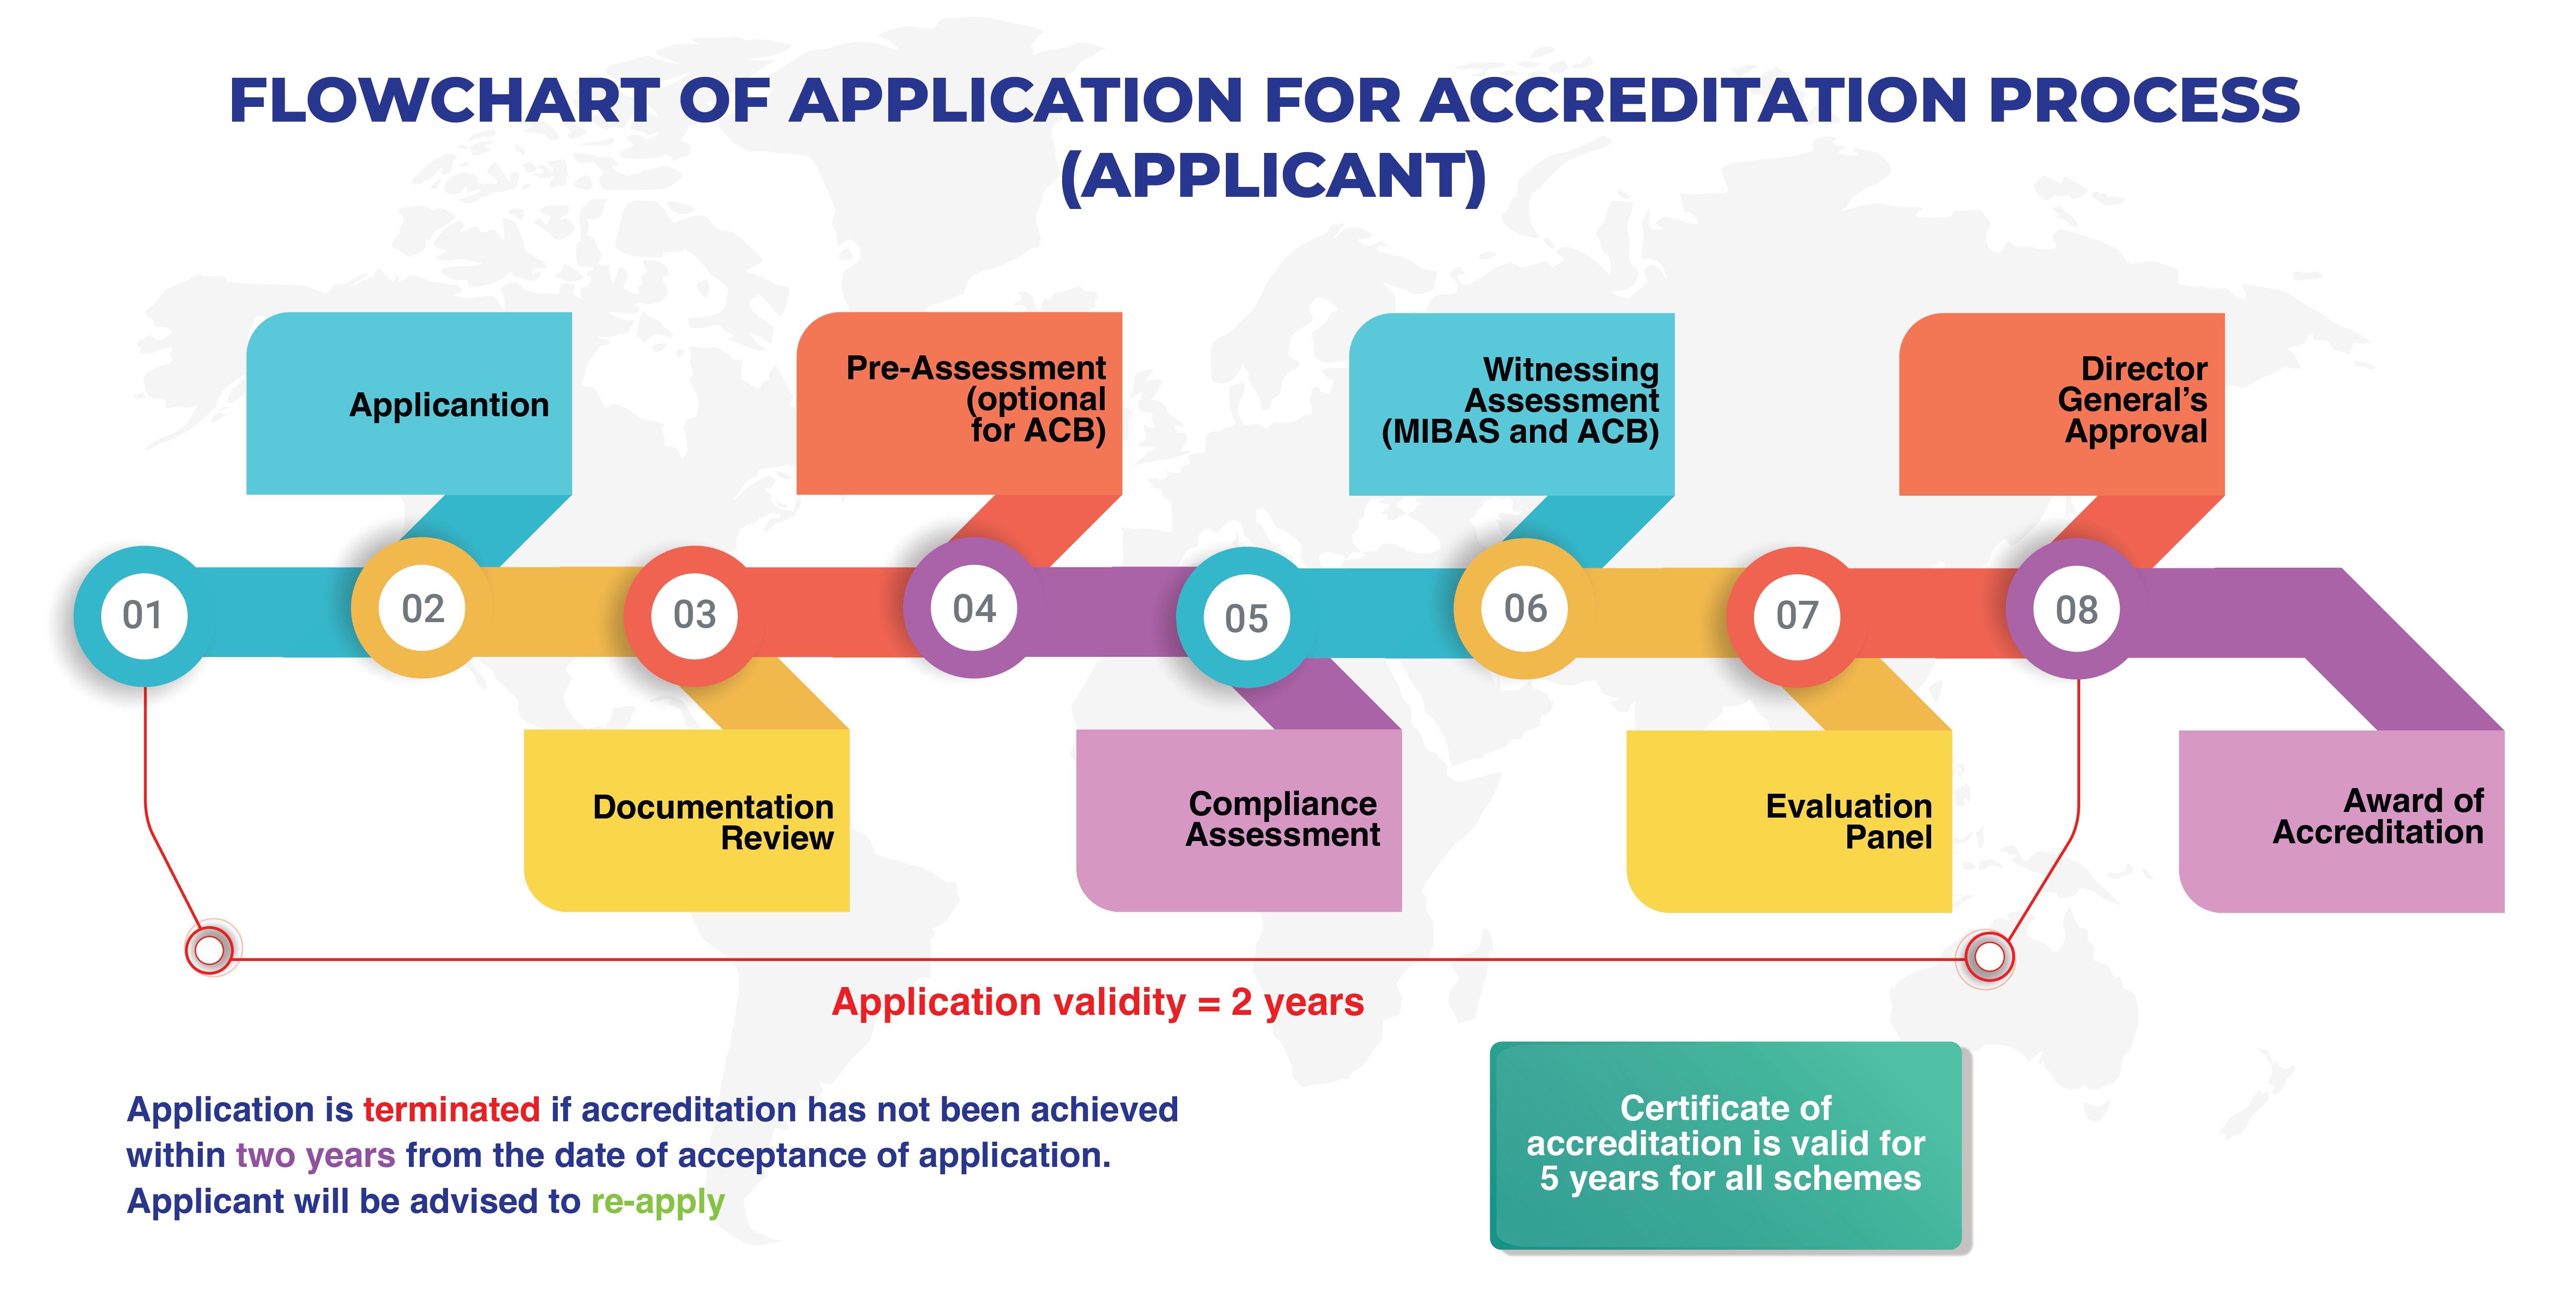 FLOWCHART OF APPLICATION FOR ACCREDITATION PROCESS APPLICANT used